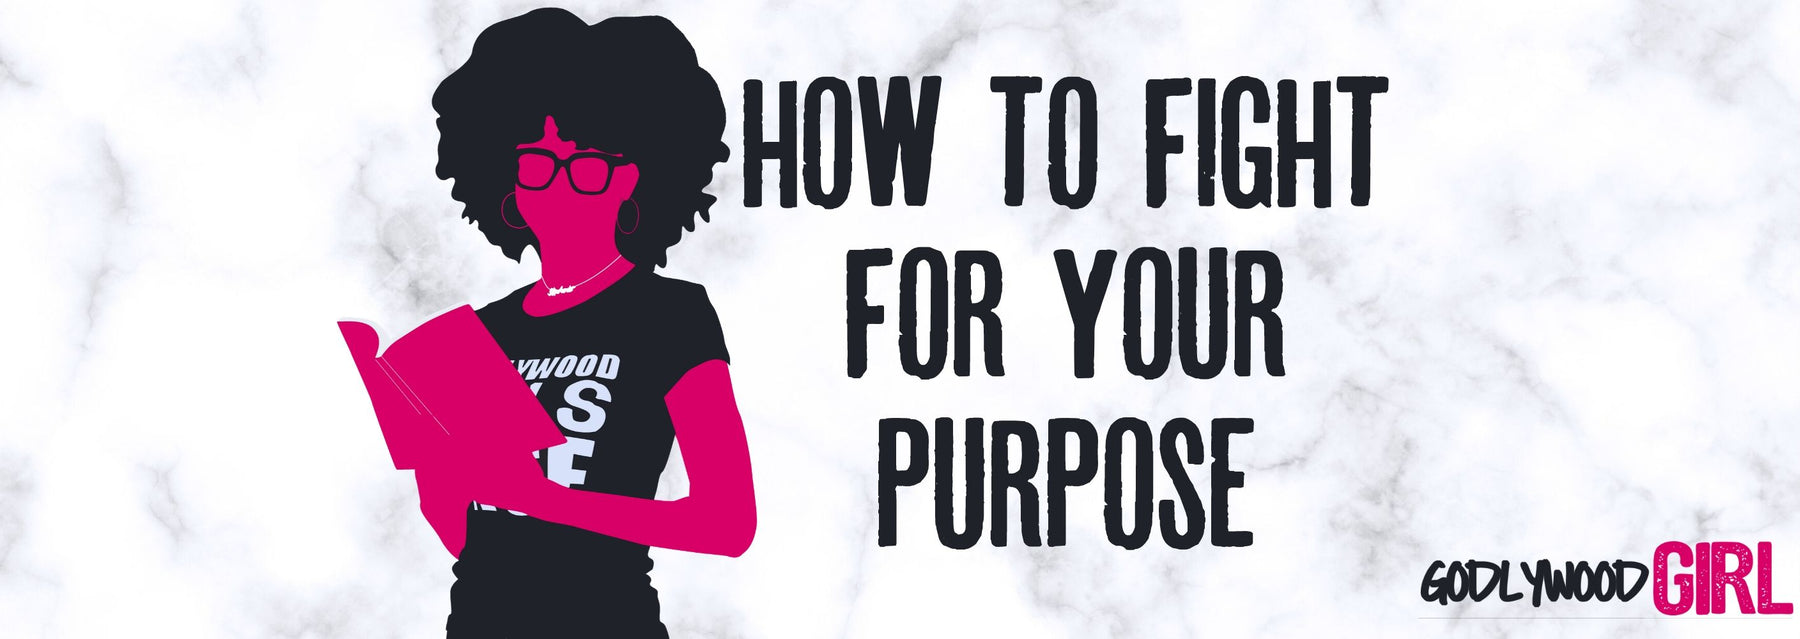 How To Fight For Your Purpose